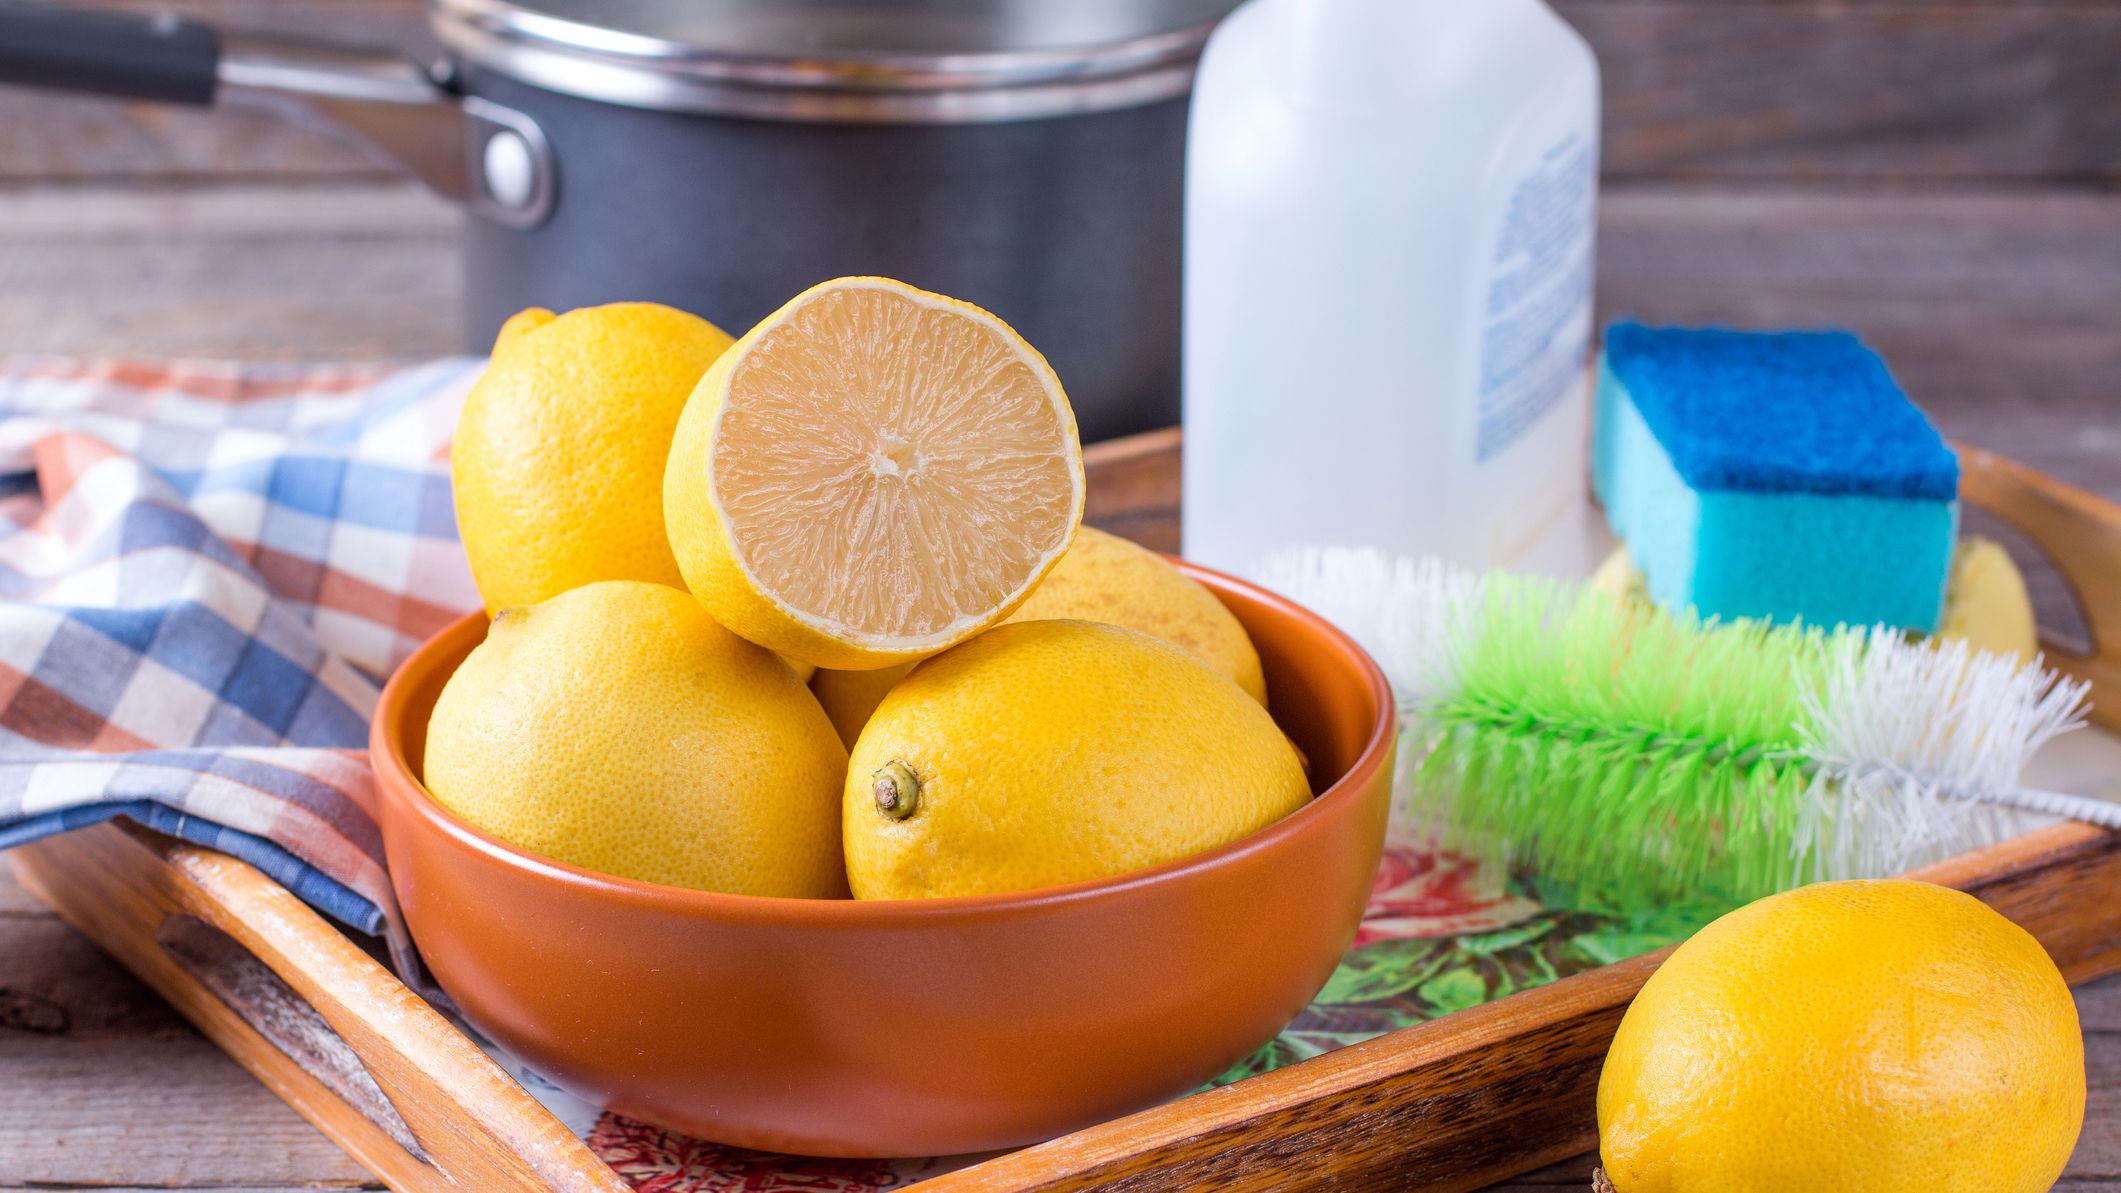 21 Eco-Friendly Ideas For Cleaning With Lemons In Your Home